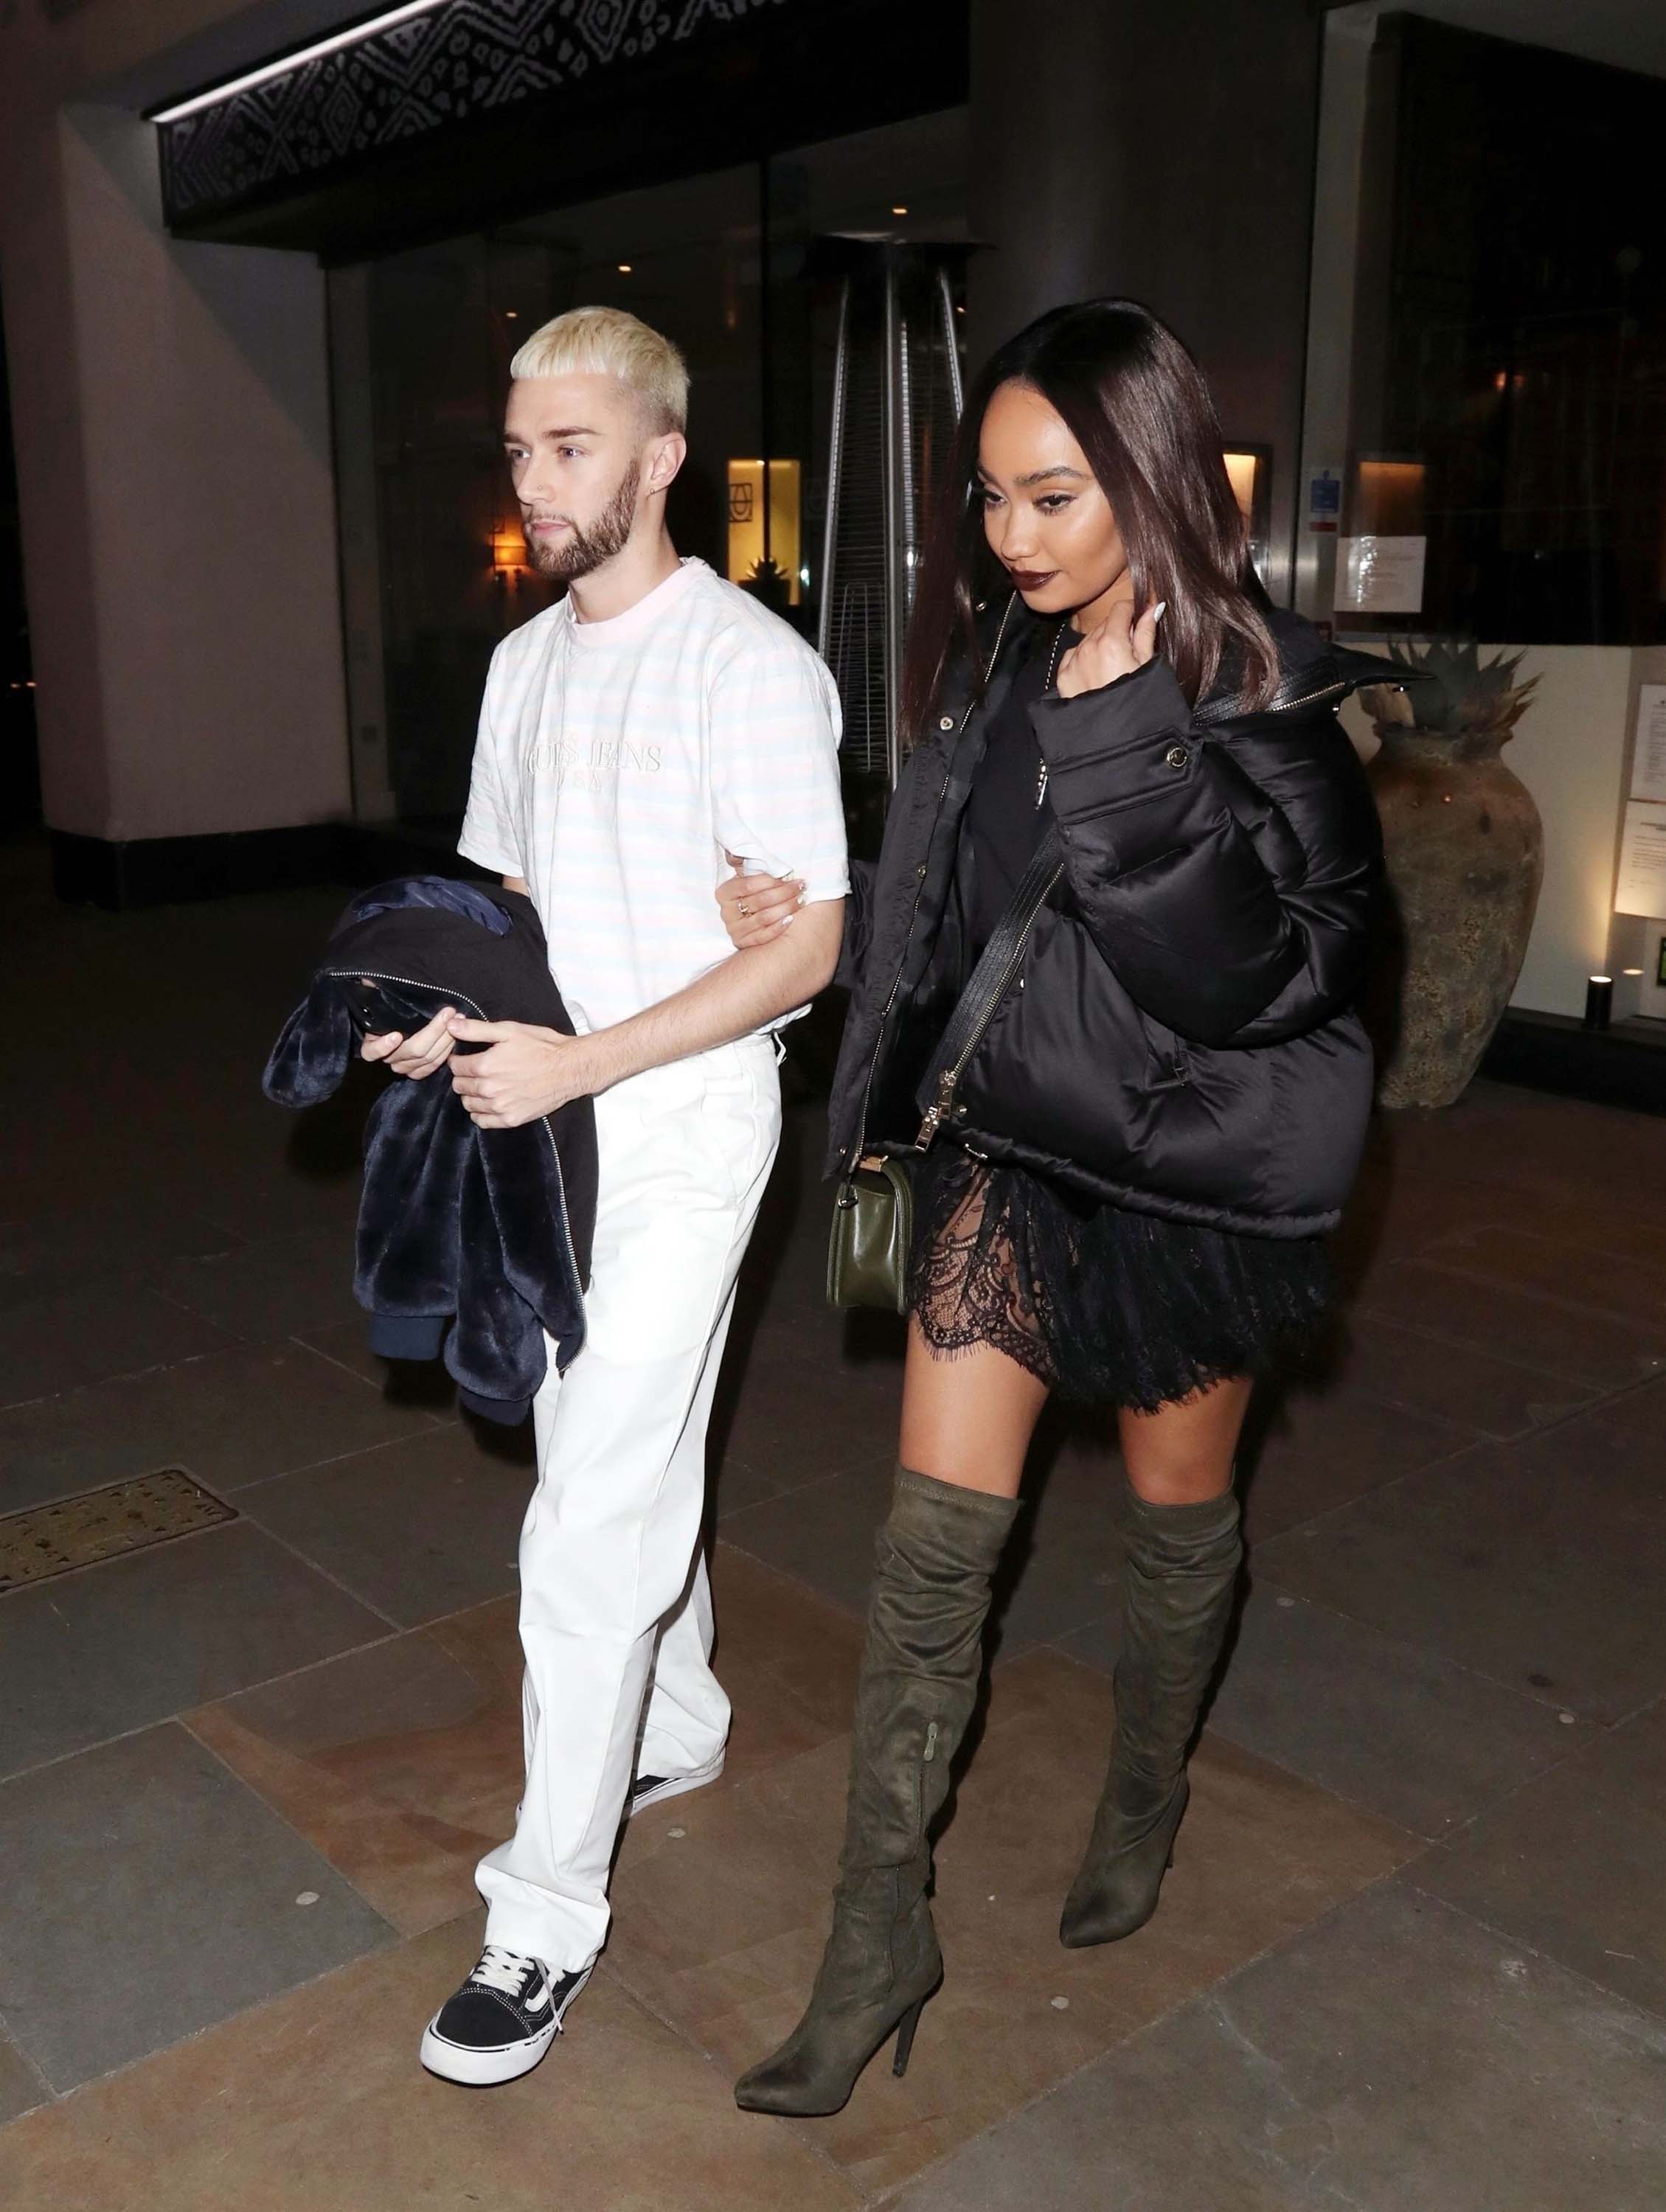 Leigh-Anne Pinnock out at Cantina Laredo restaurant